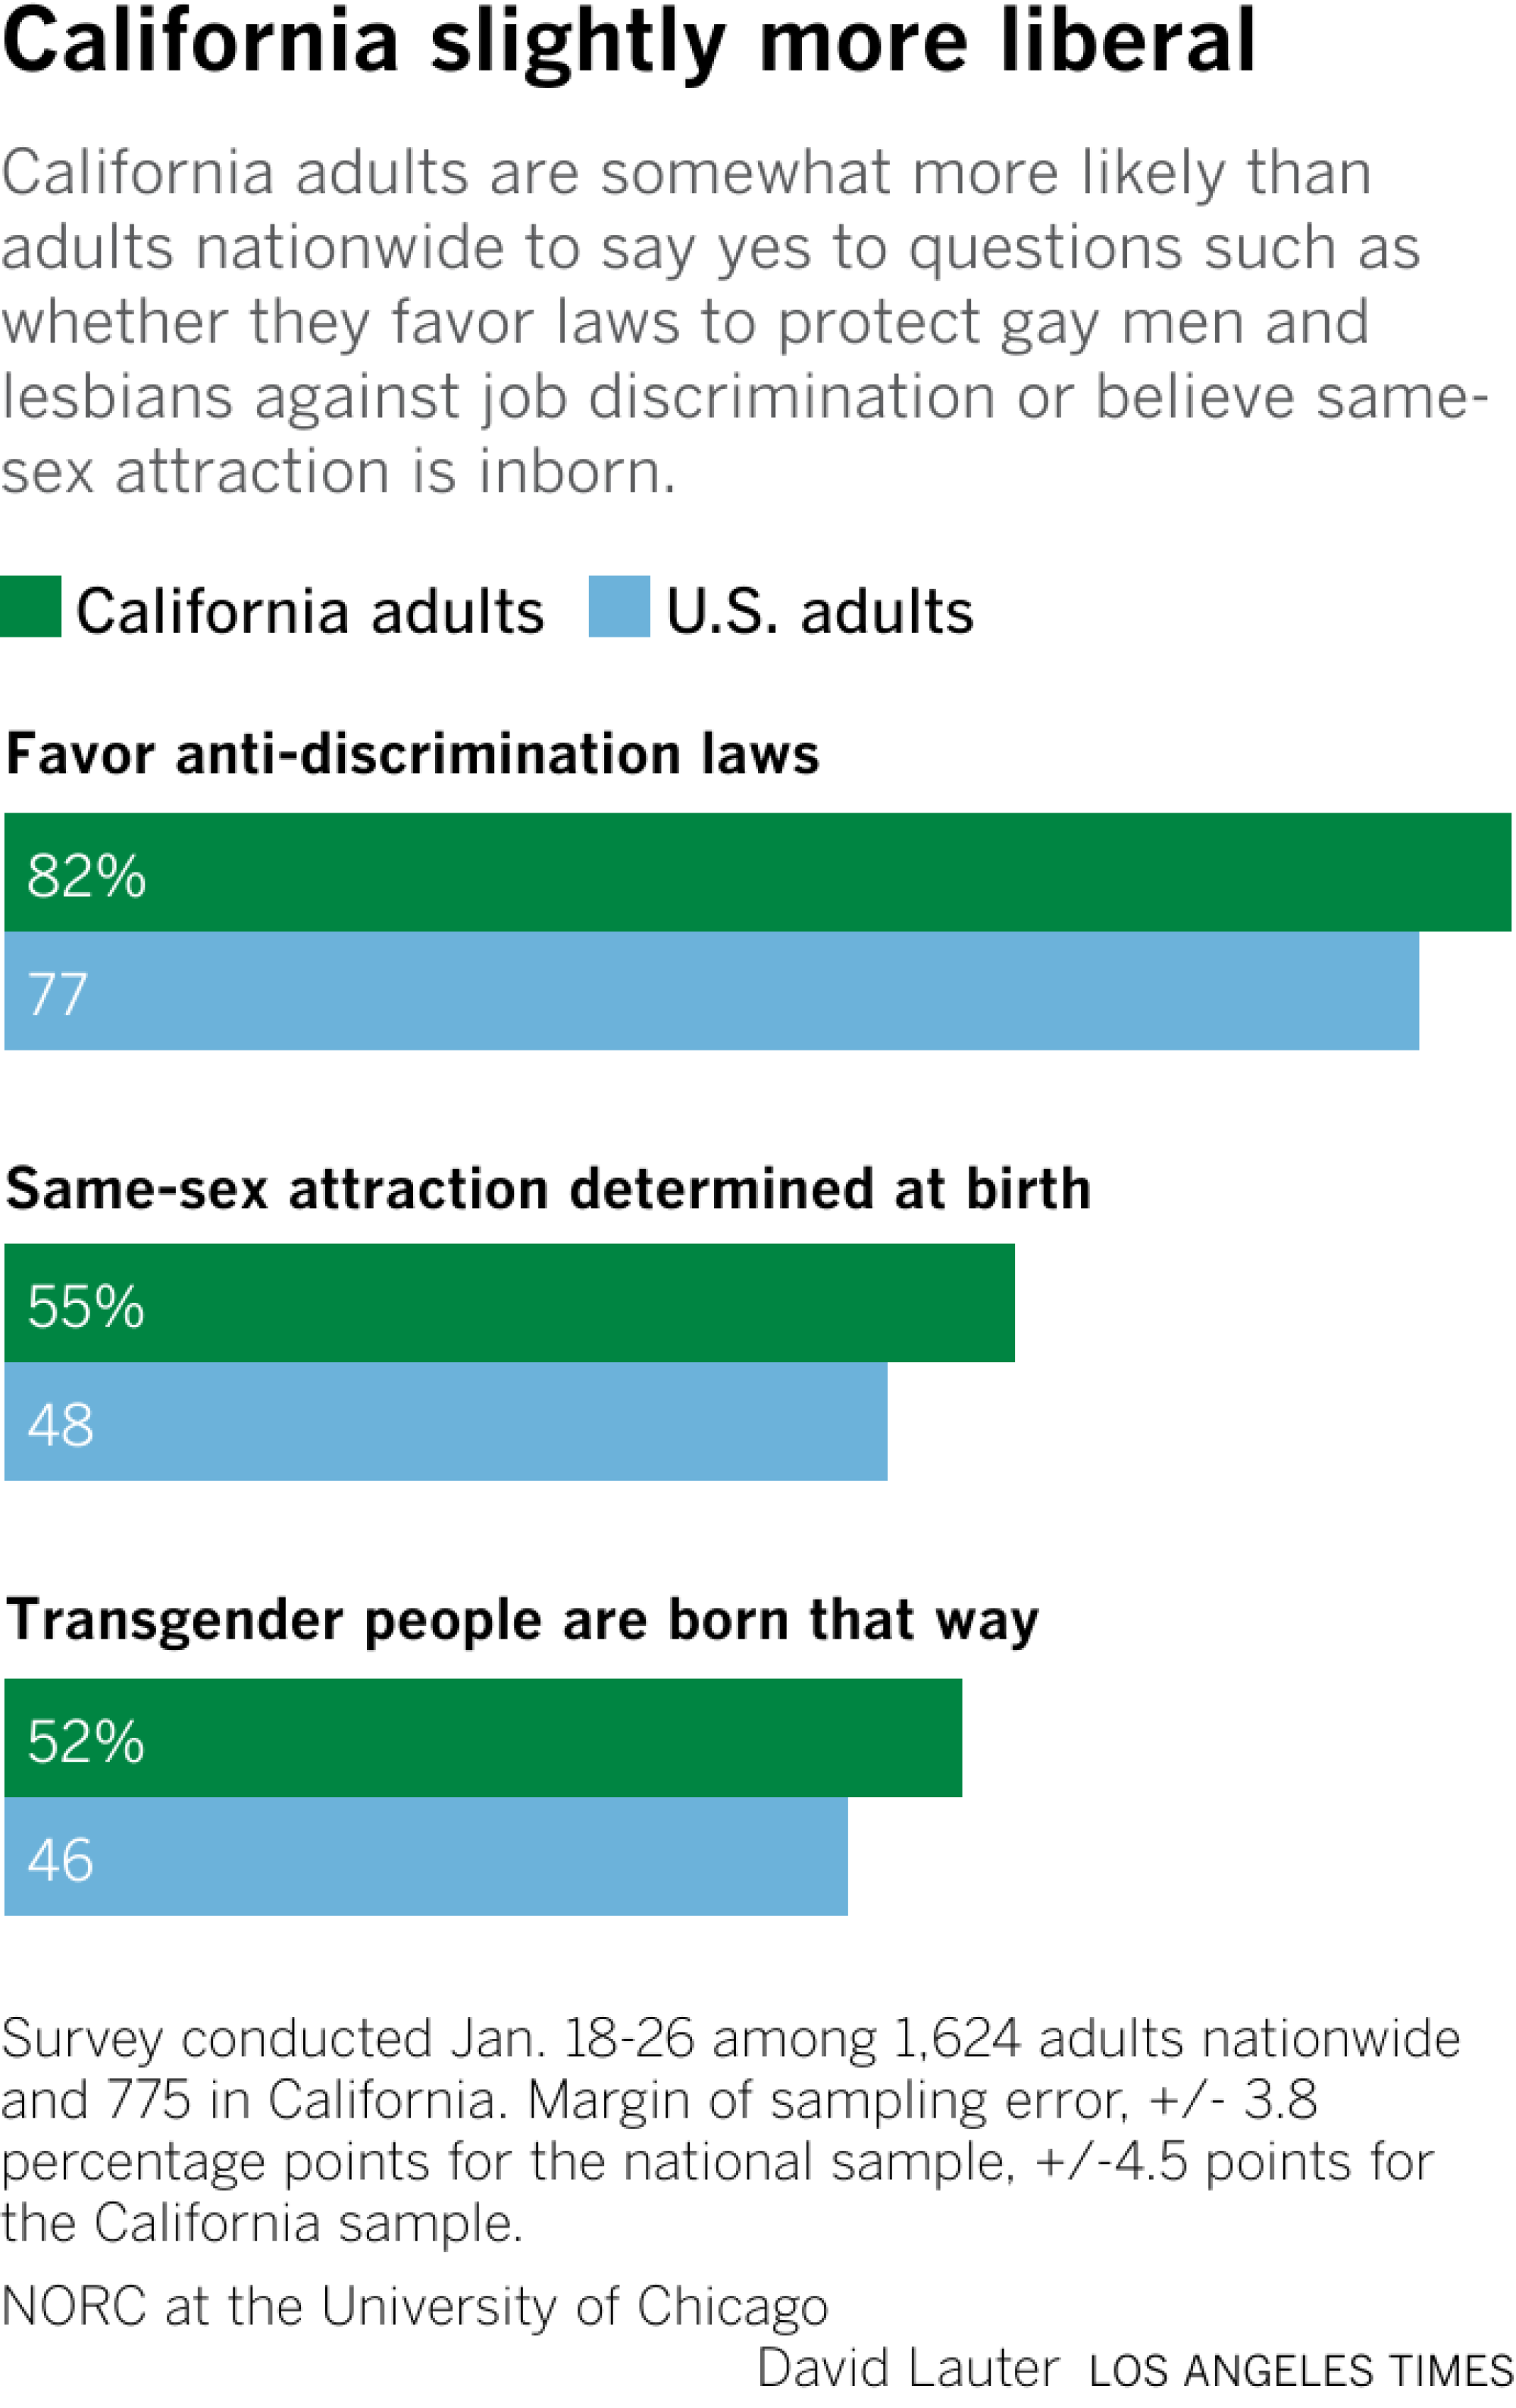 The bar graph shows the share of California adults and adults nationwide who say yes to three questions about LGBTQ+ issues.